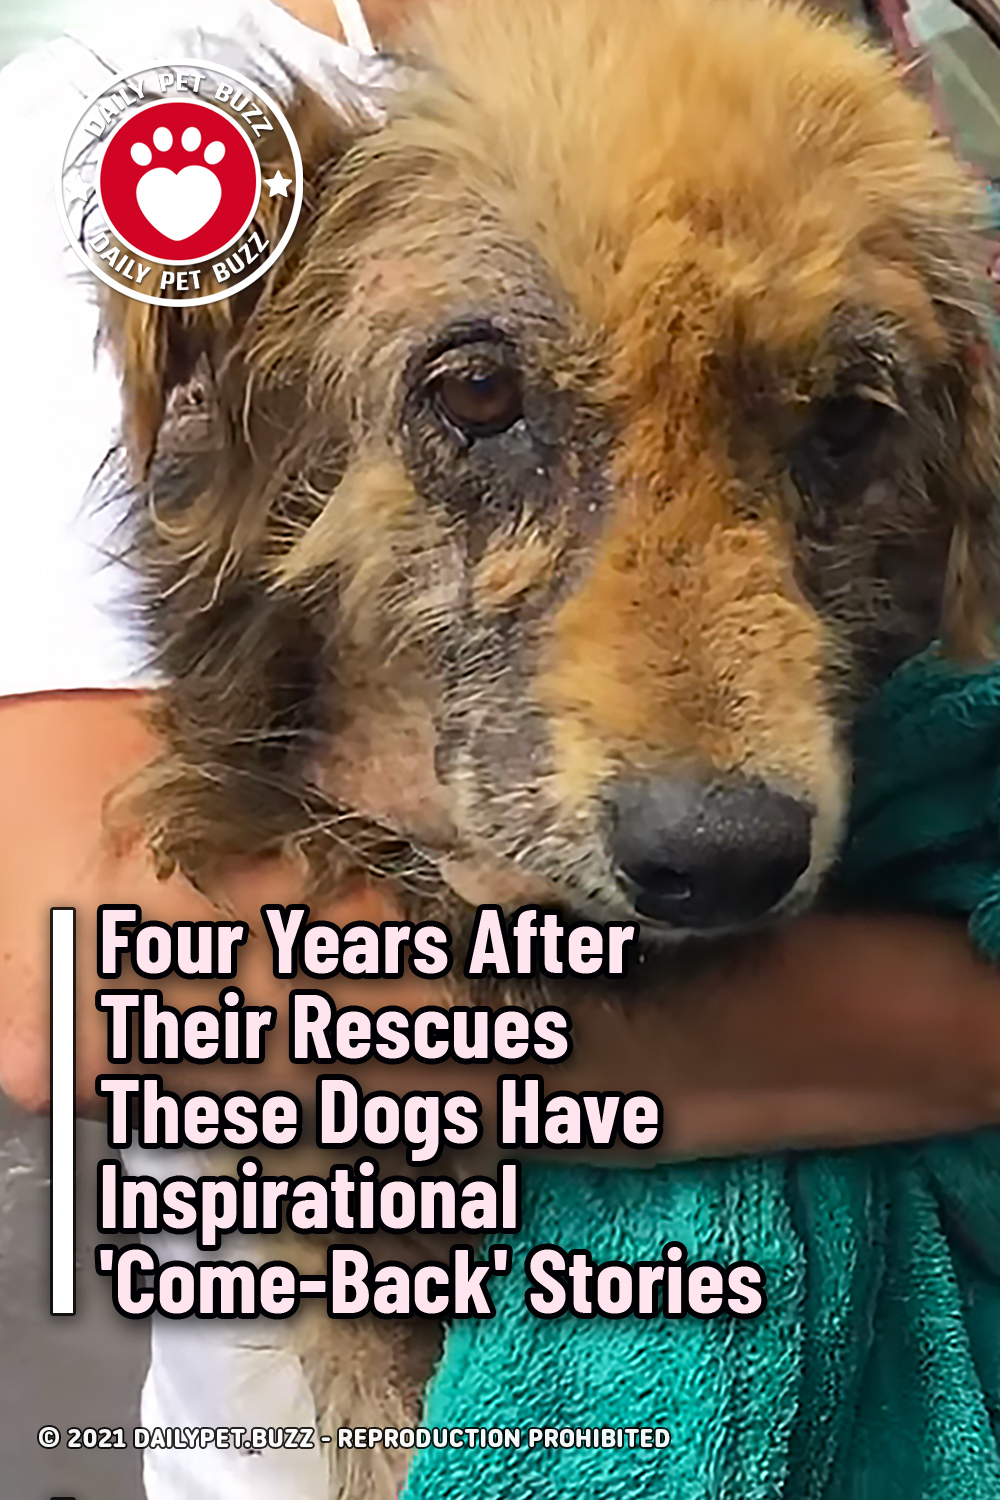 Four Years After Their Rescues These Dogs Have Inspirational \'Come-Back\' Stories